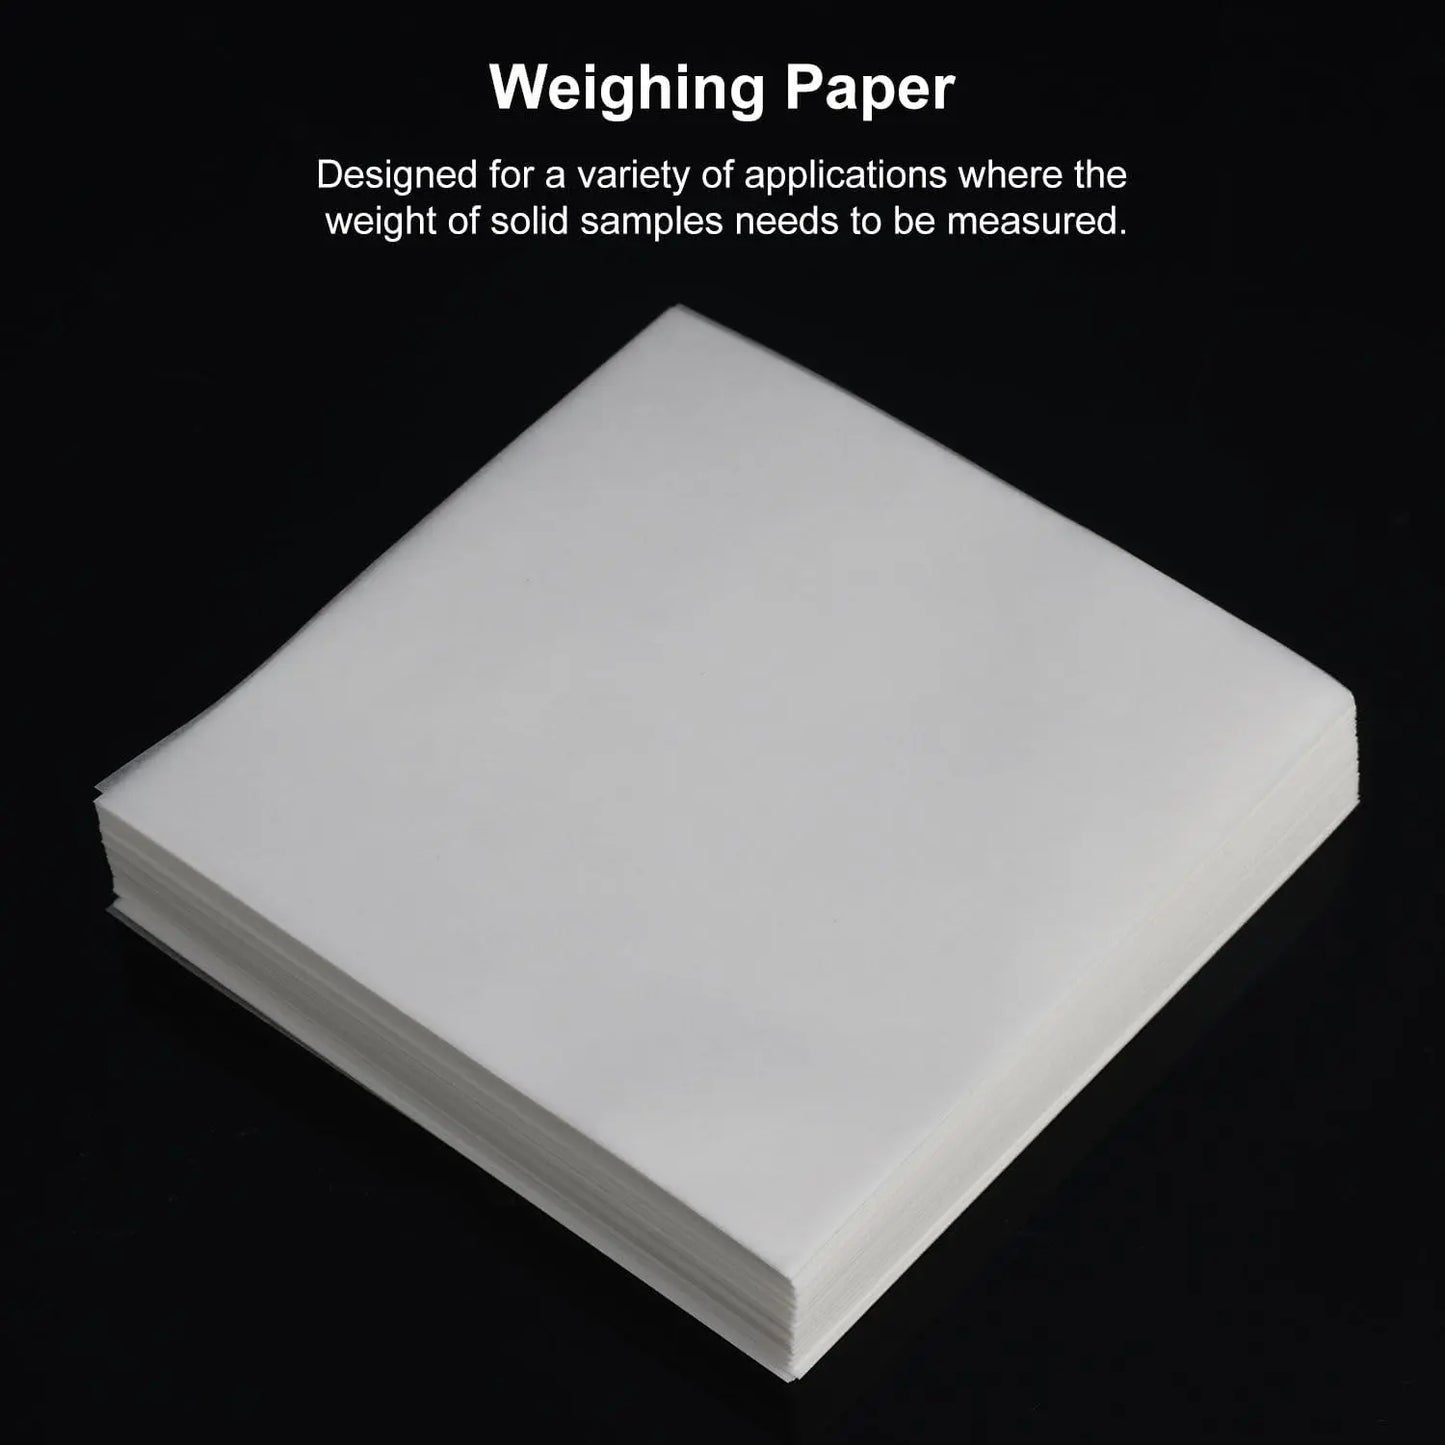 Nitrogen-Free Weighing Paper, Pack of 500 Weighing Paper